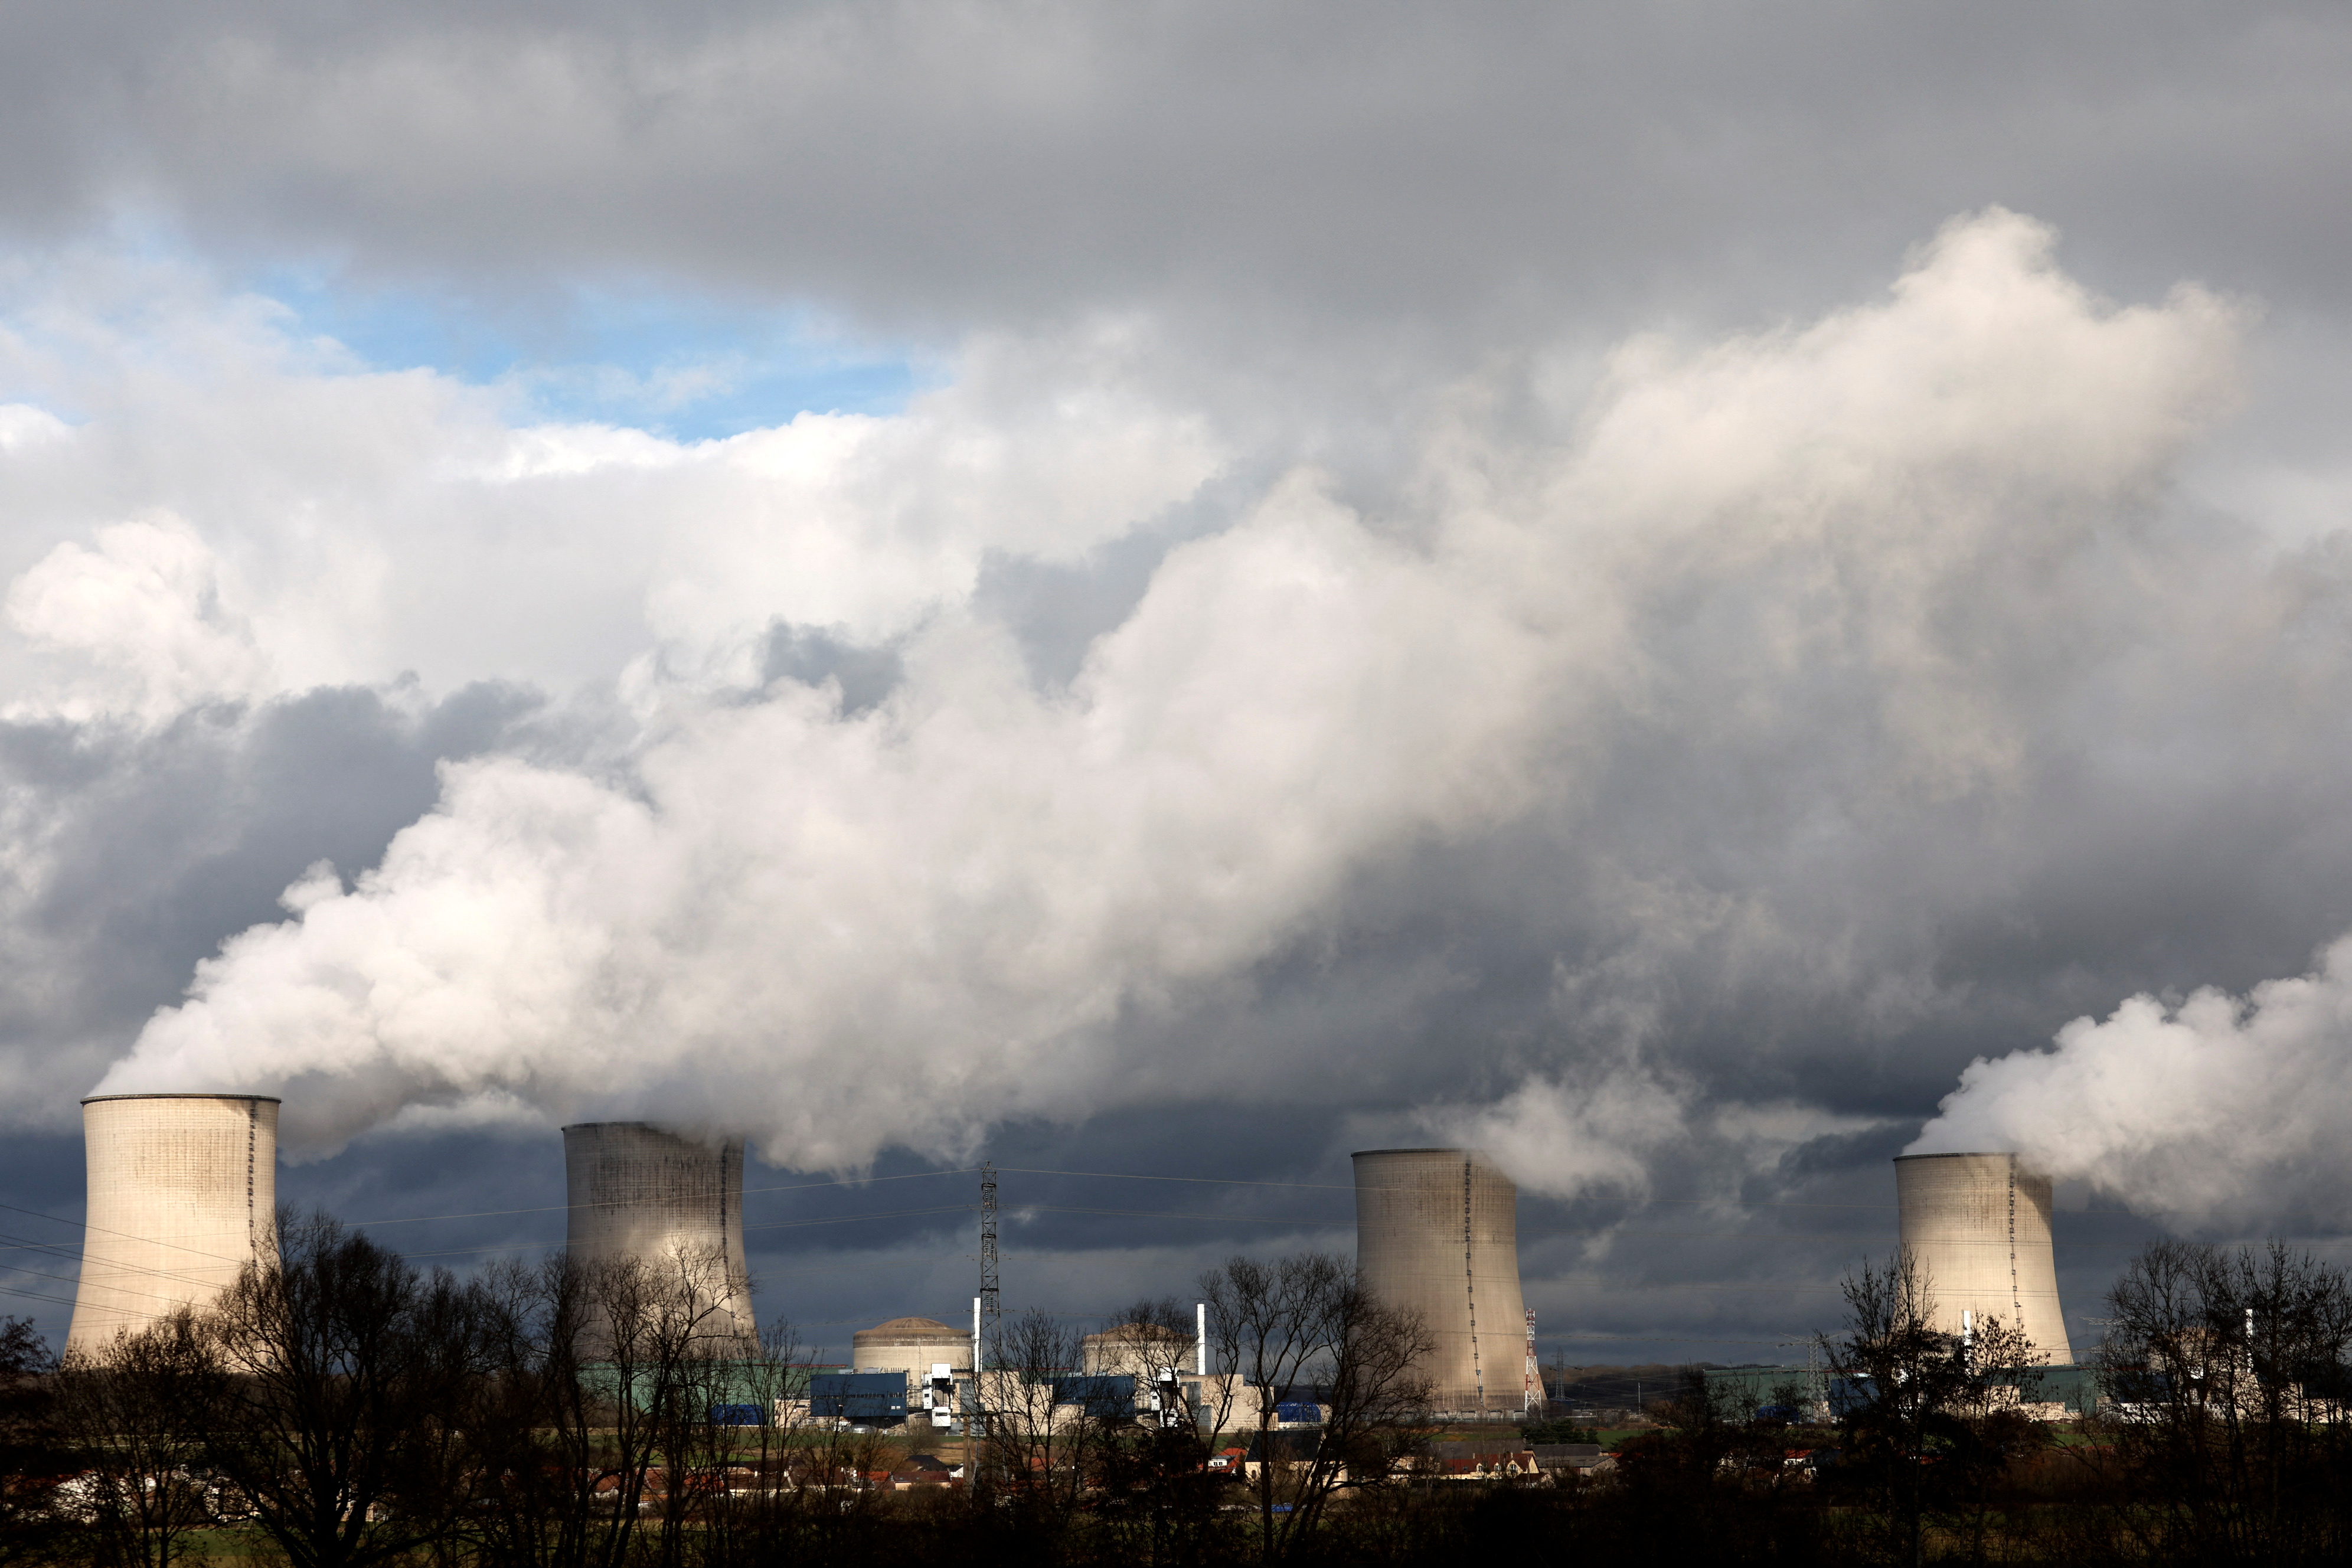 A general view shows the four cooling towers and the reactors of the Electricite de France (EDF) nuclear power plant in Cattenom